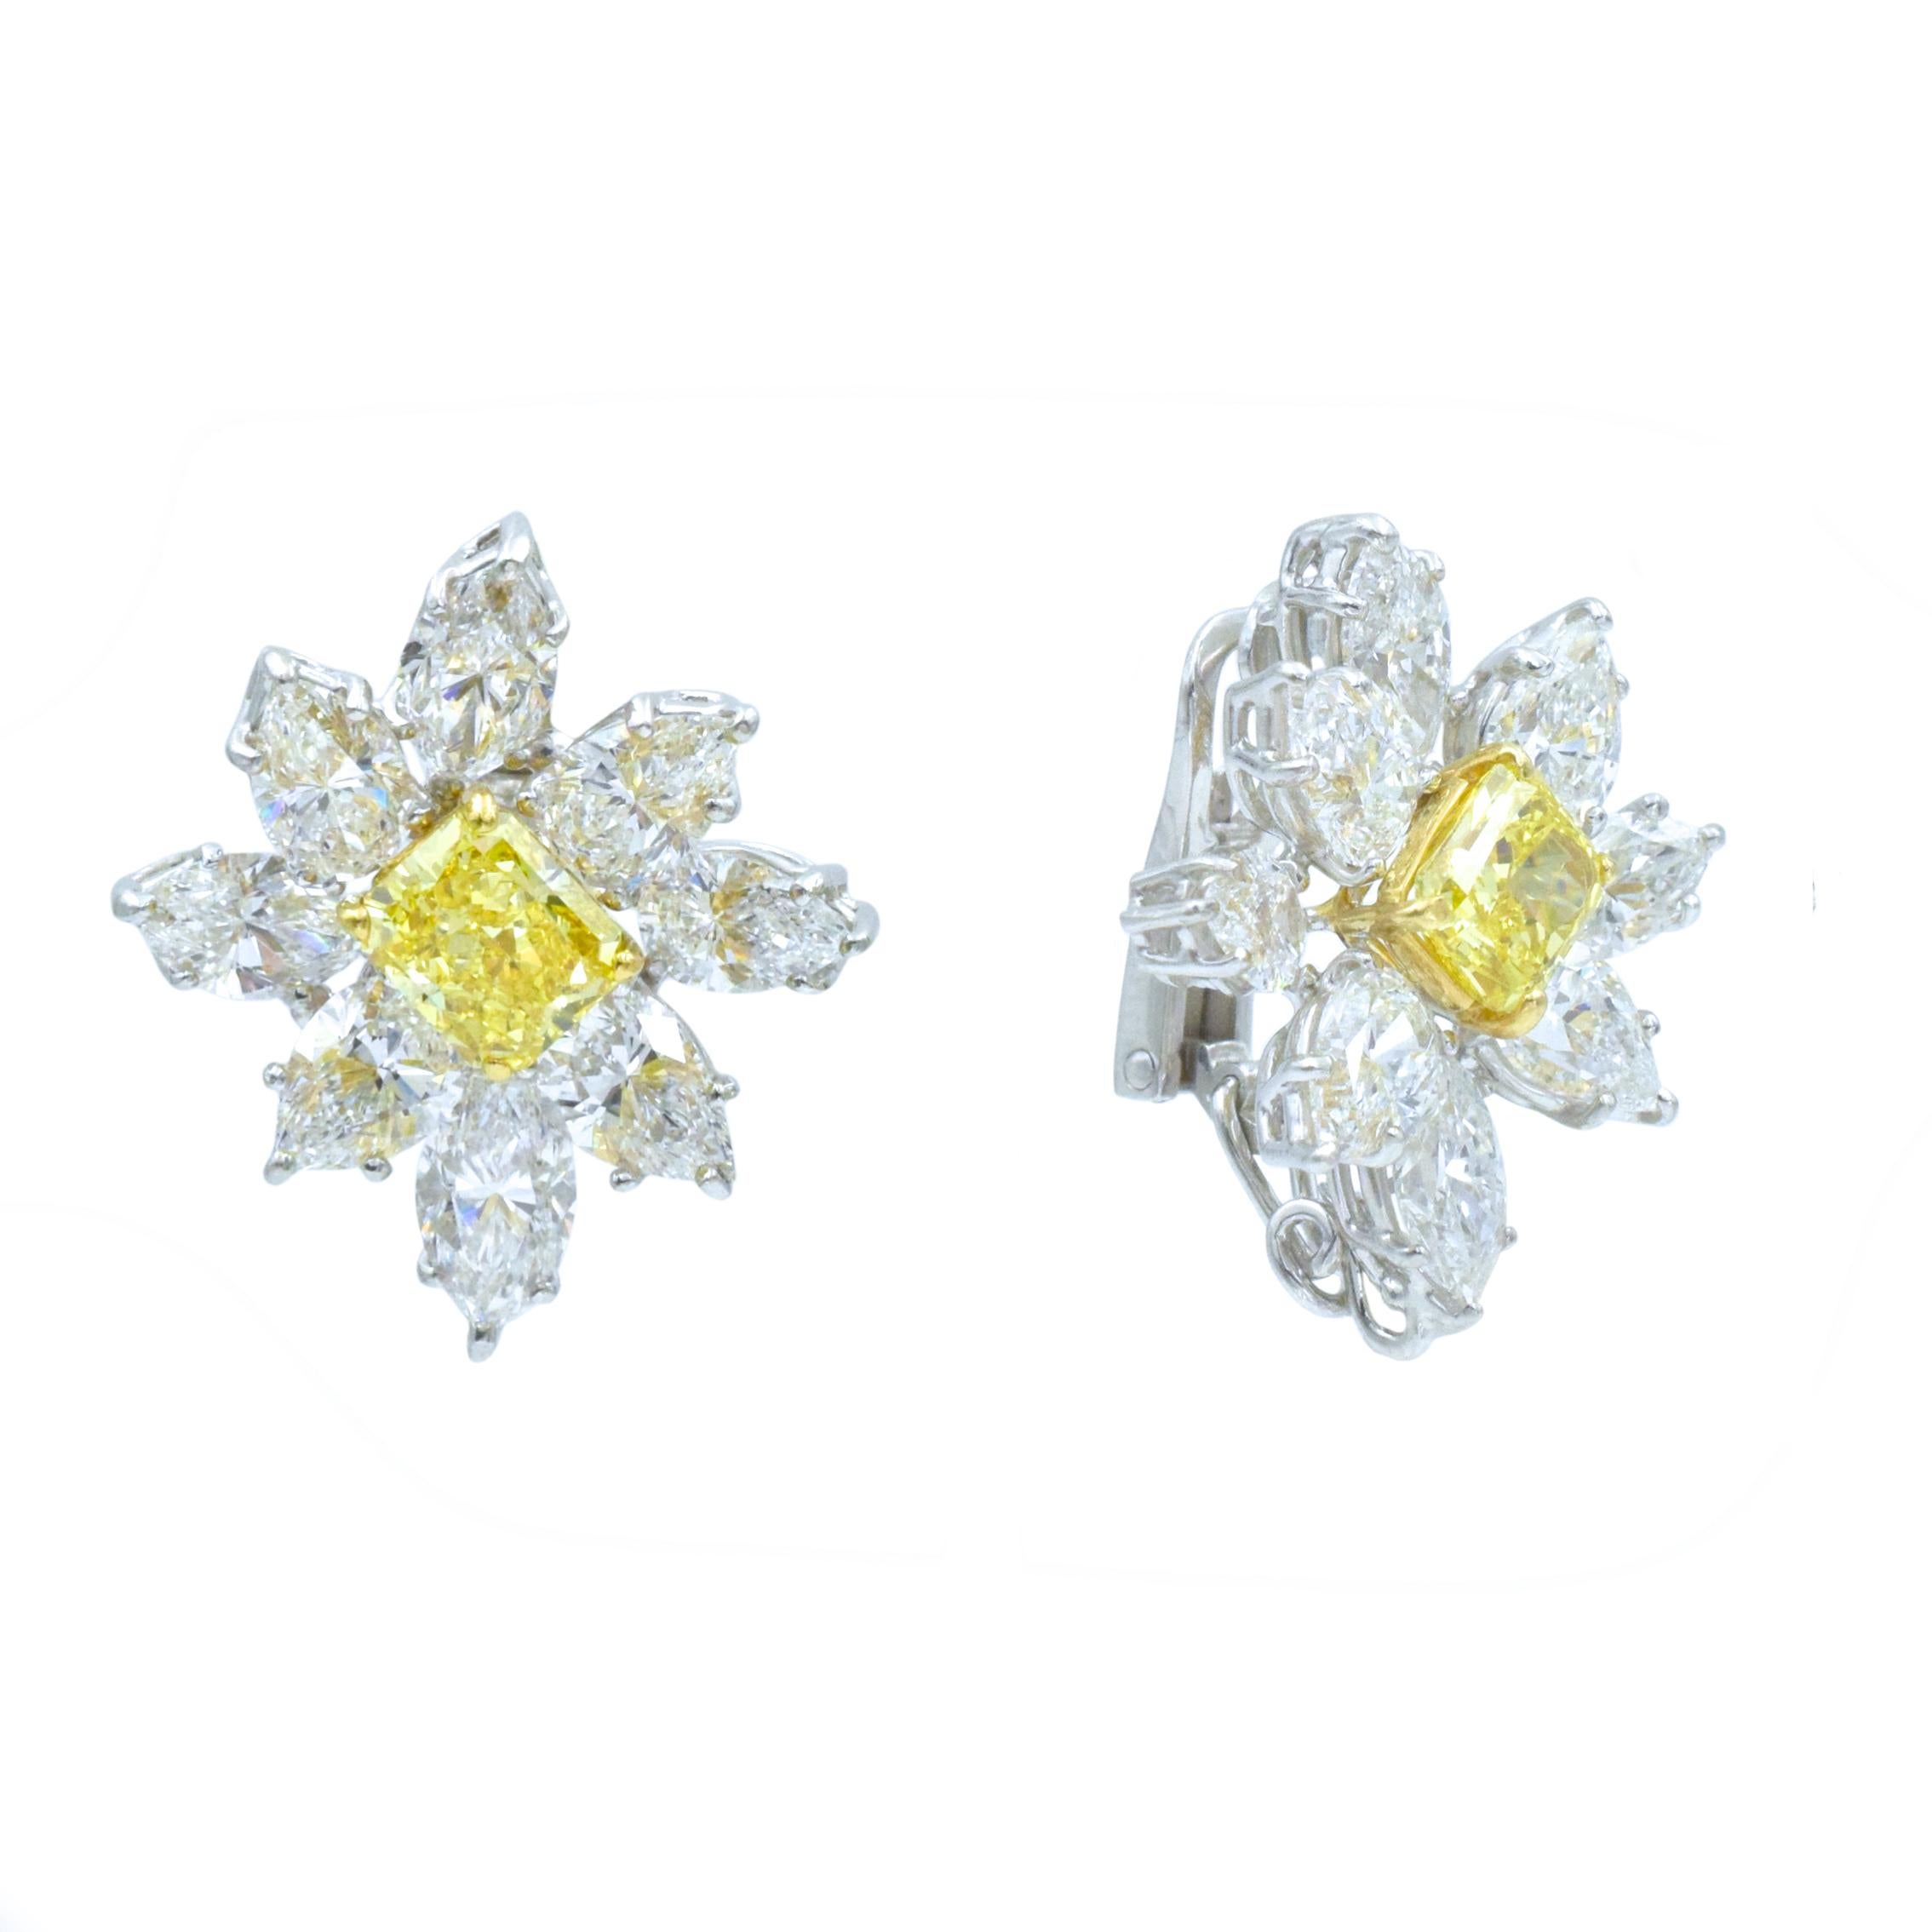 Graff, Fancy Vivid Yellow Diamond and white Damond Cluster Ear-clips  
Center set with two cut- cornered rectangular modified brilliant Fancy Vivid Yellow diamonds weighing total of 2.31 carat  (With GIA report stating 1.23 cts., Fancy Vivid Yellow,